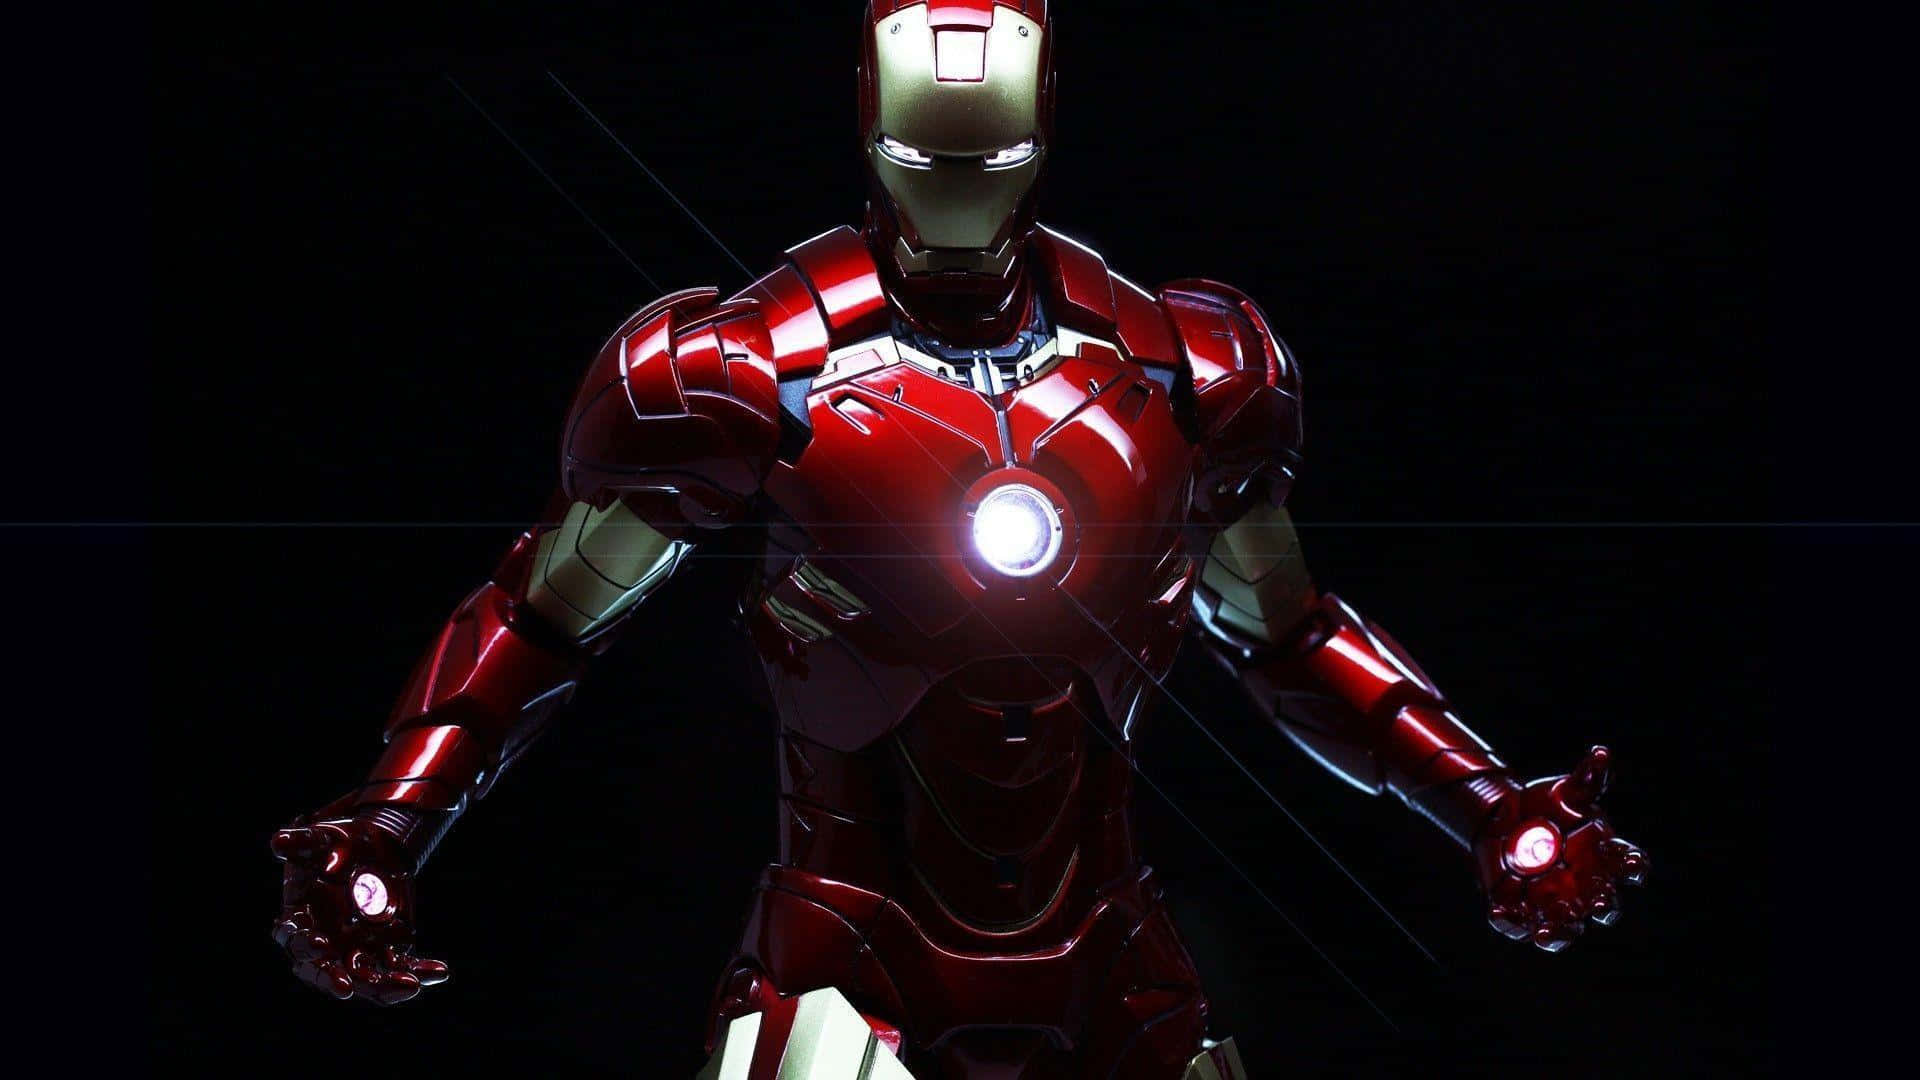 Iron Man Suited Up and Ready to Go! Wallpaper